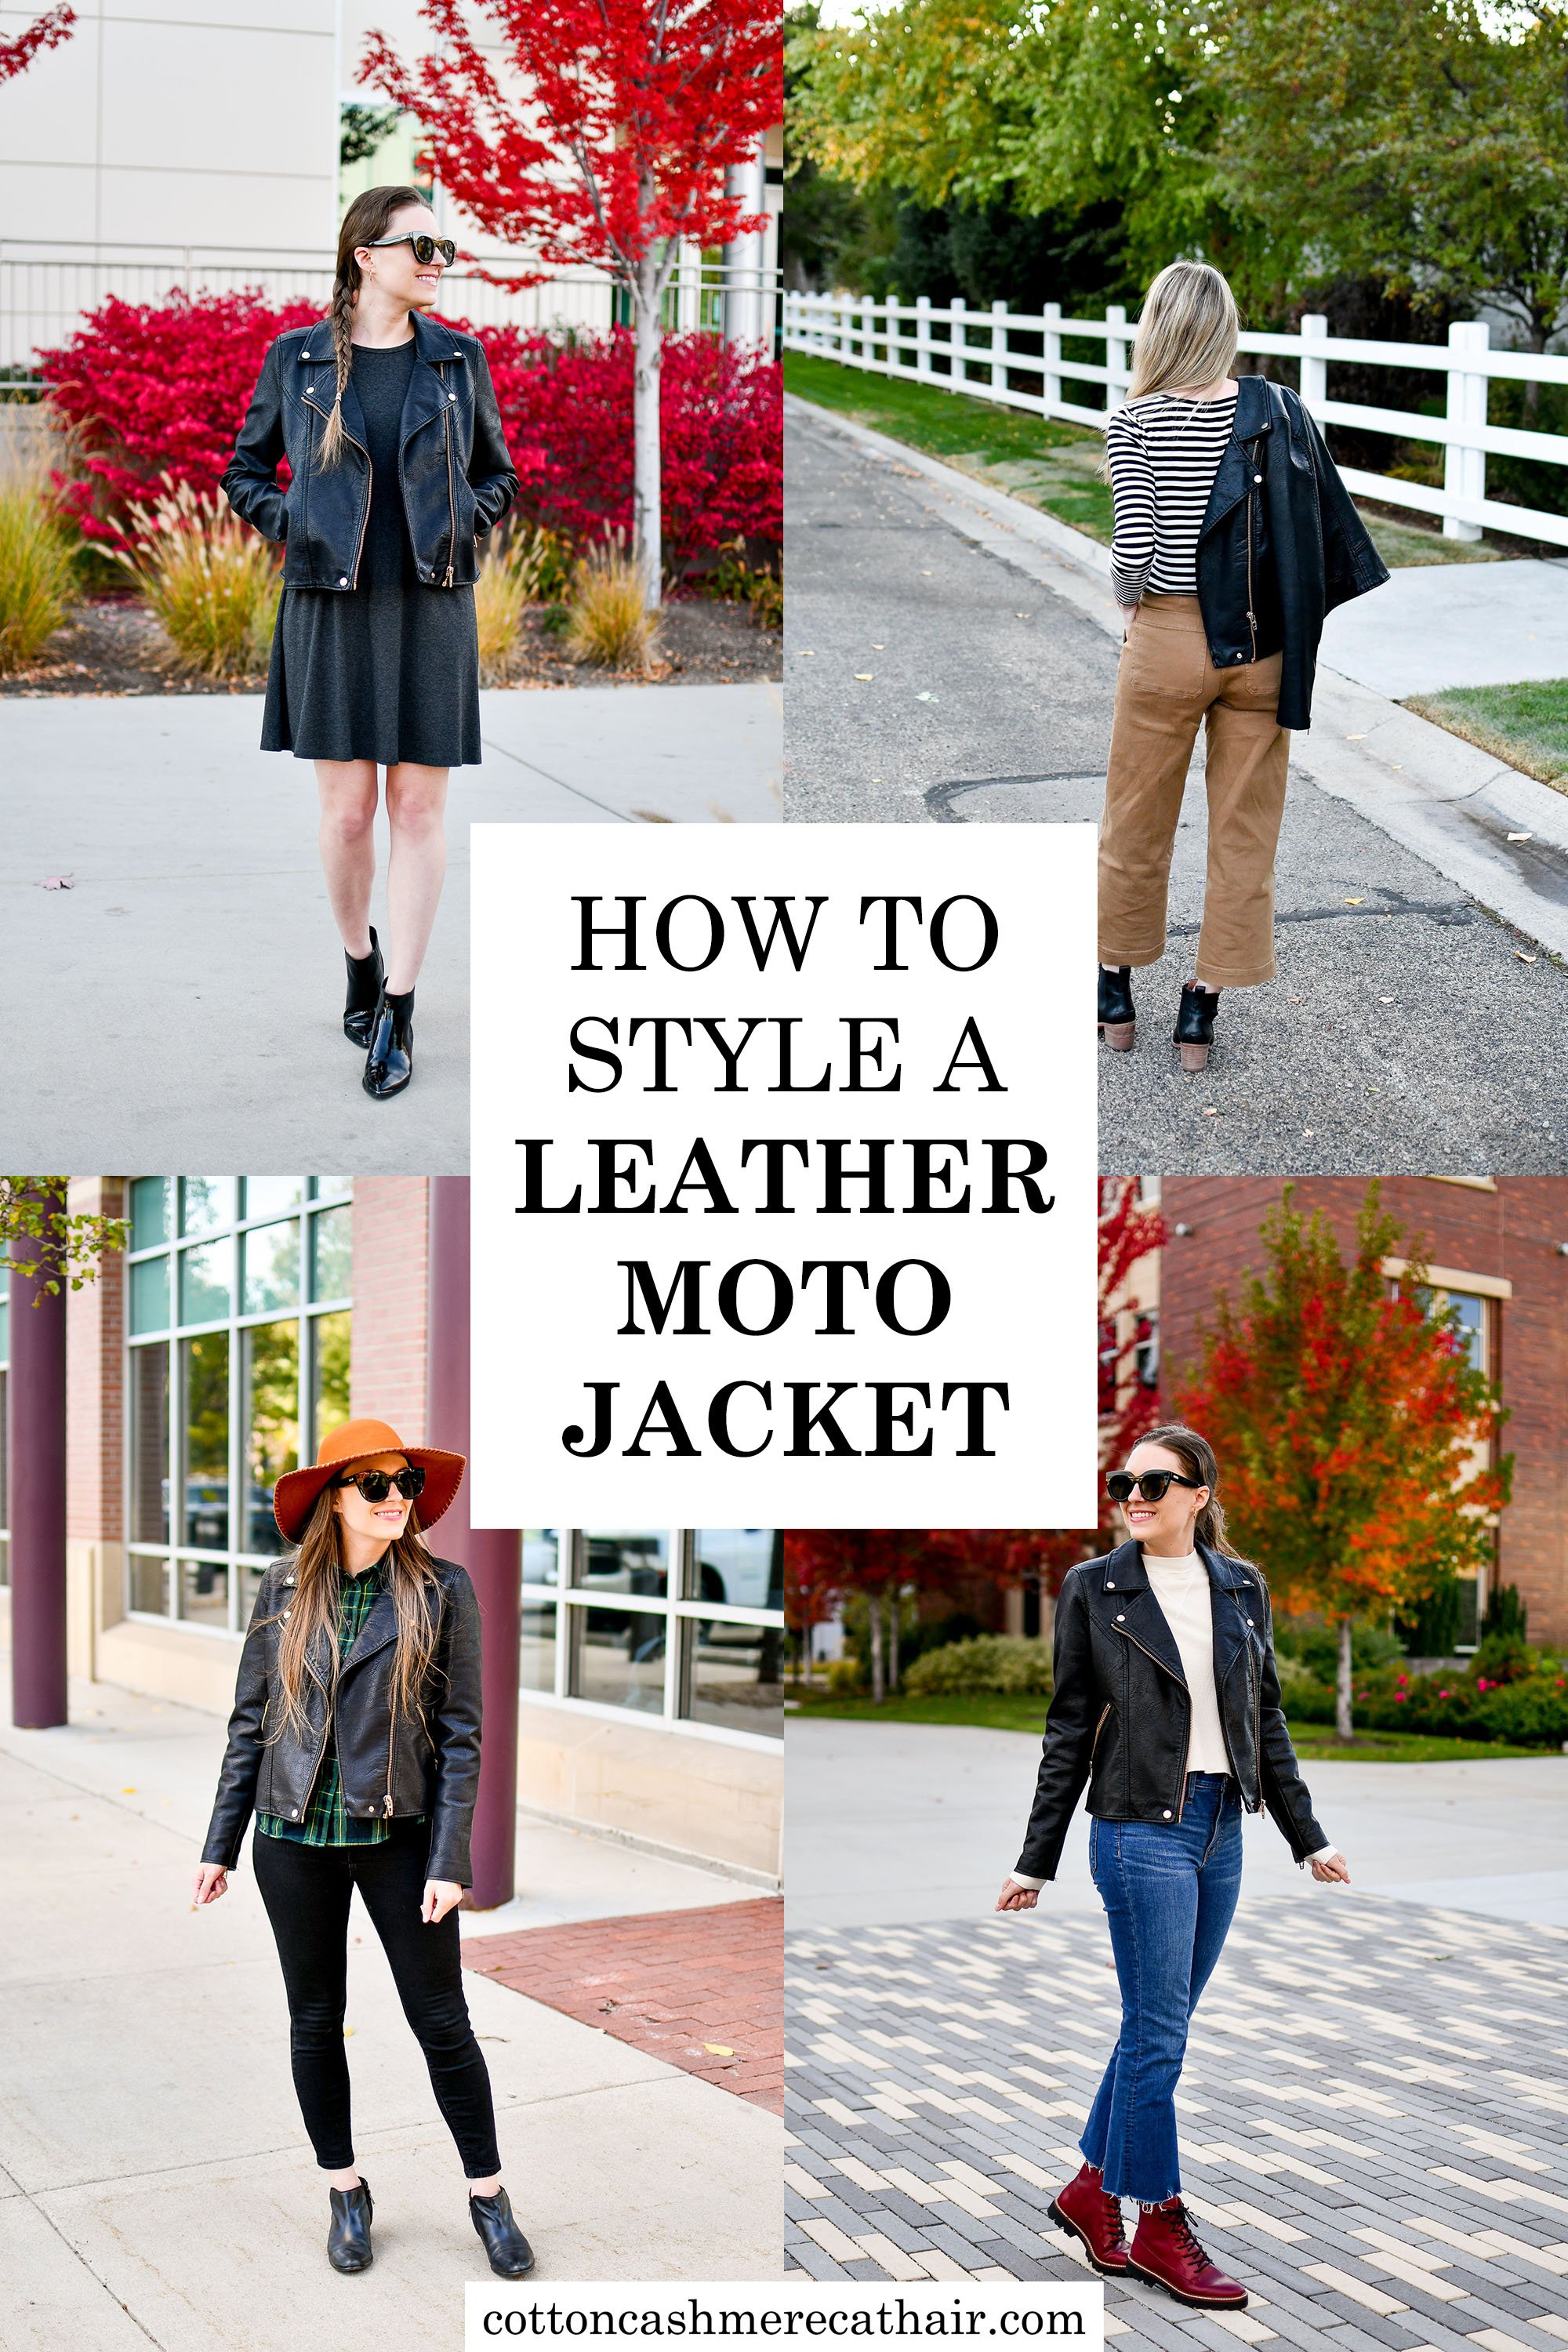 5 Fall Work Outfit Ideas, Petite Friendly Jackets